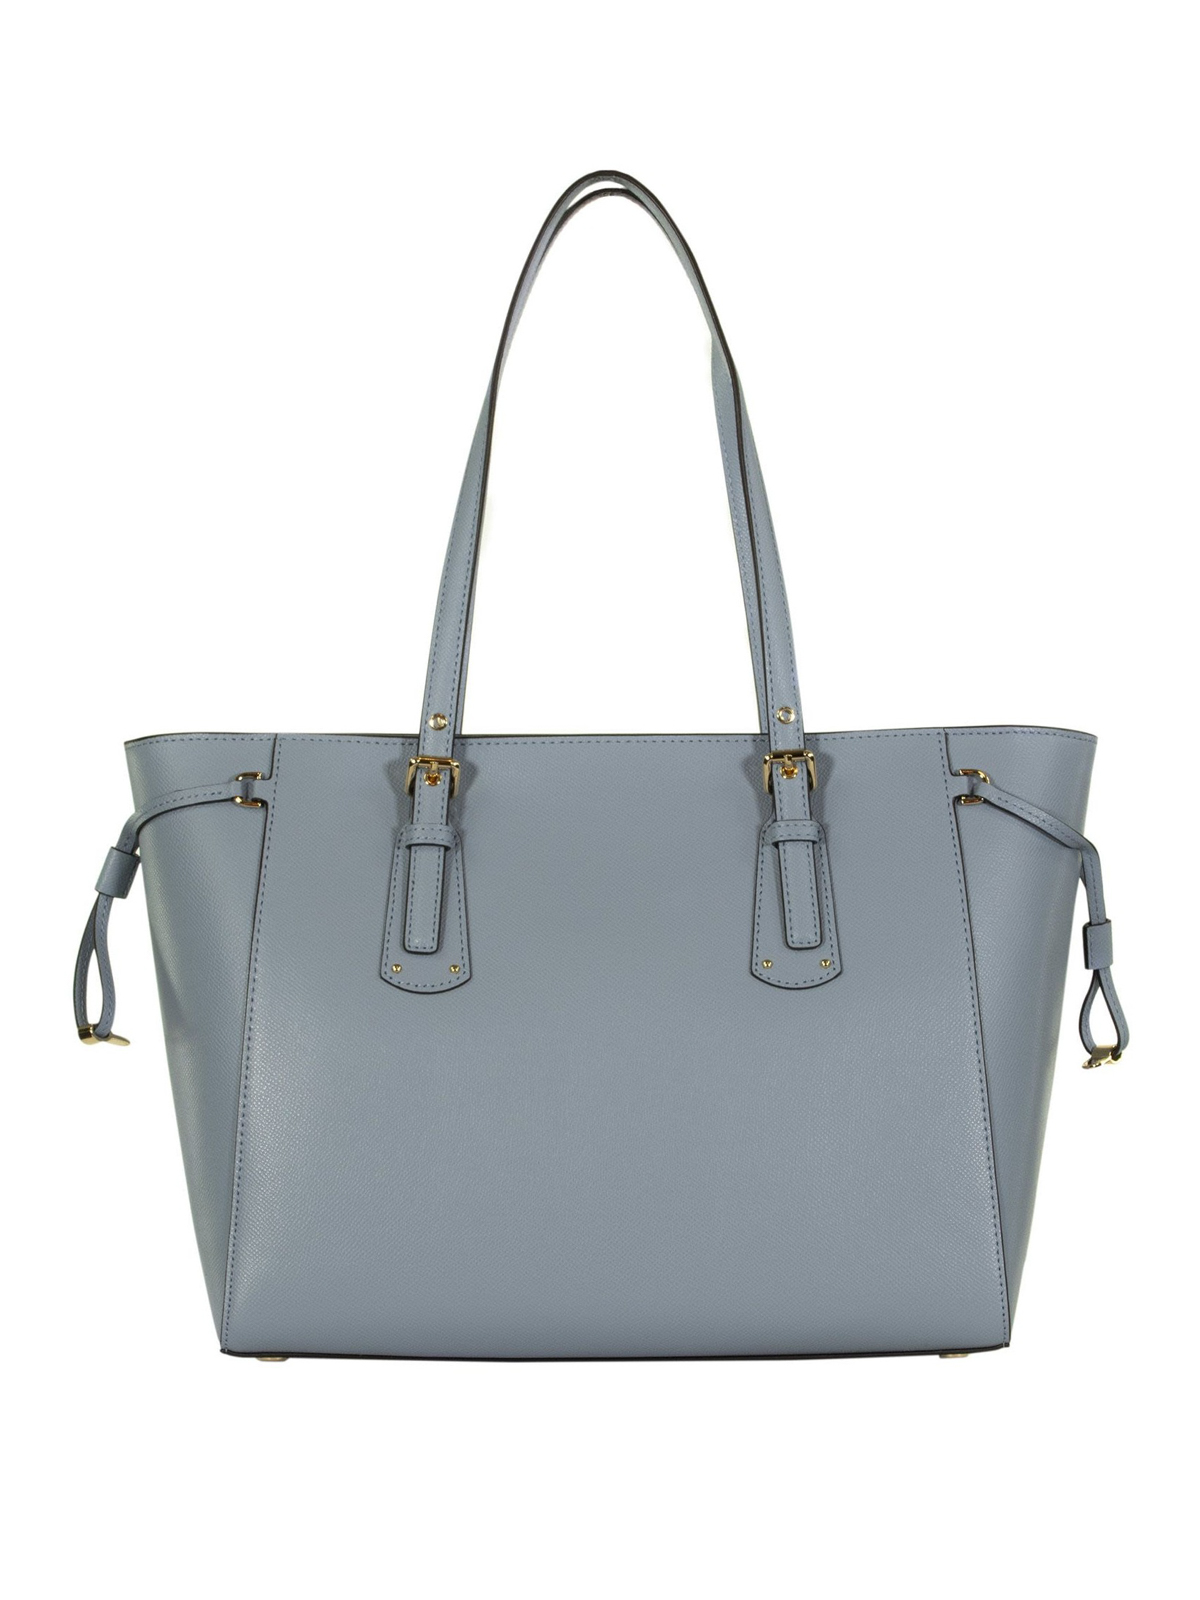 Michael Kors - Voyager light blue leather medium tote - totes bags ...